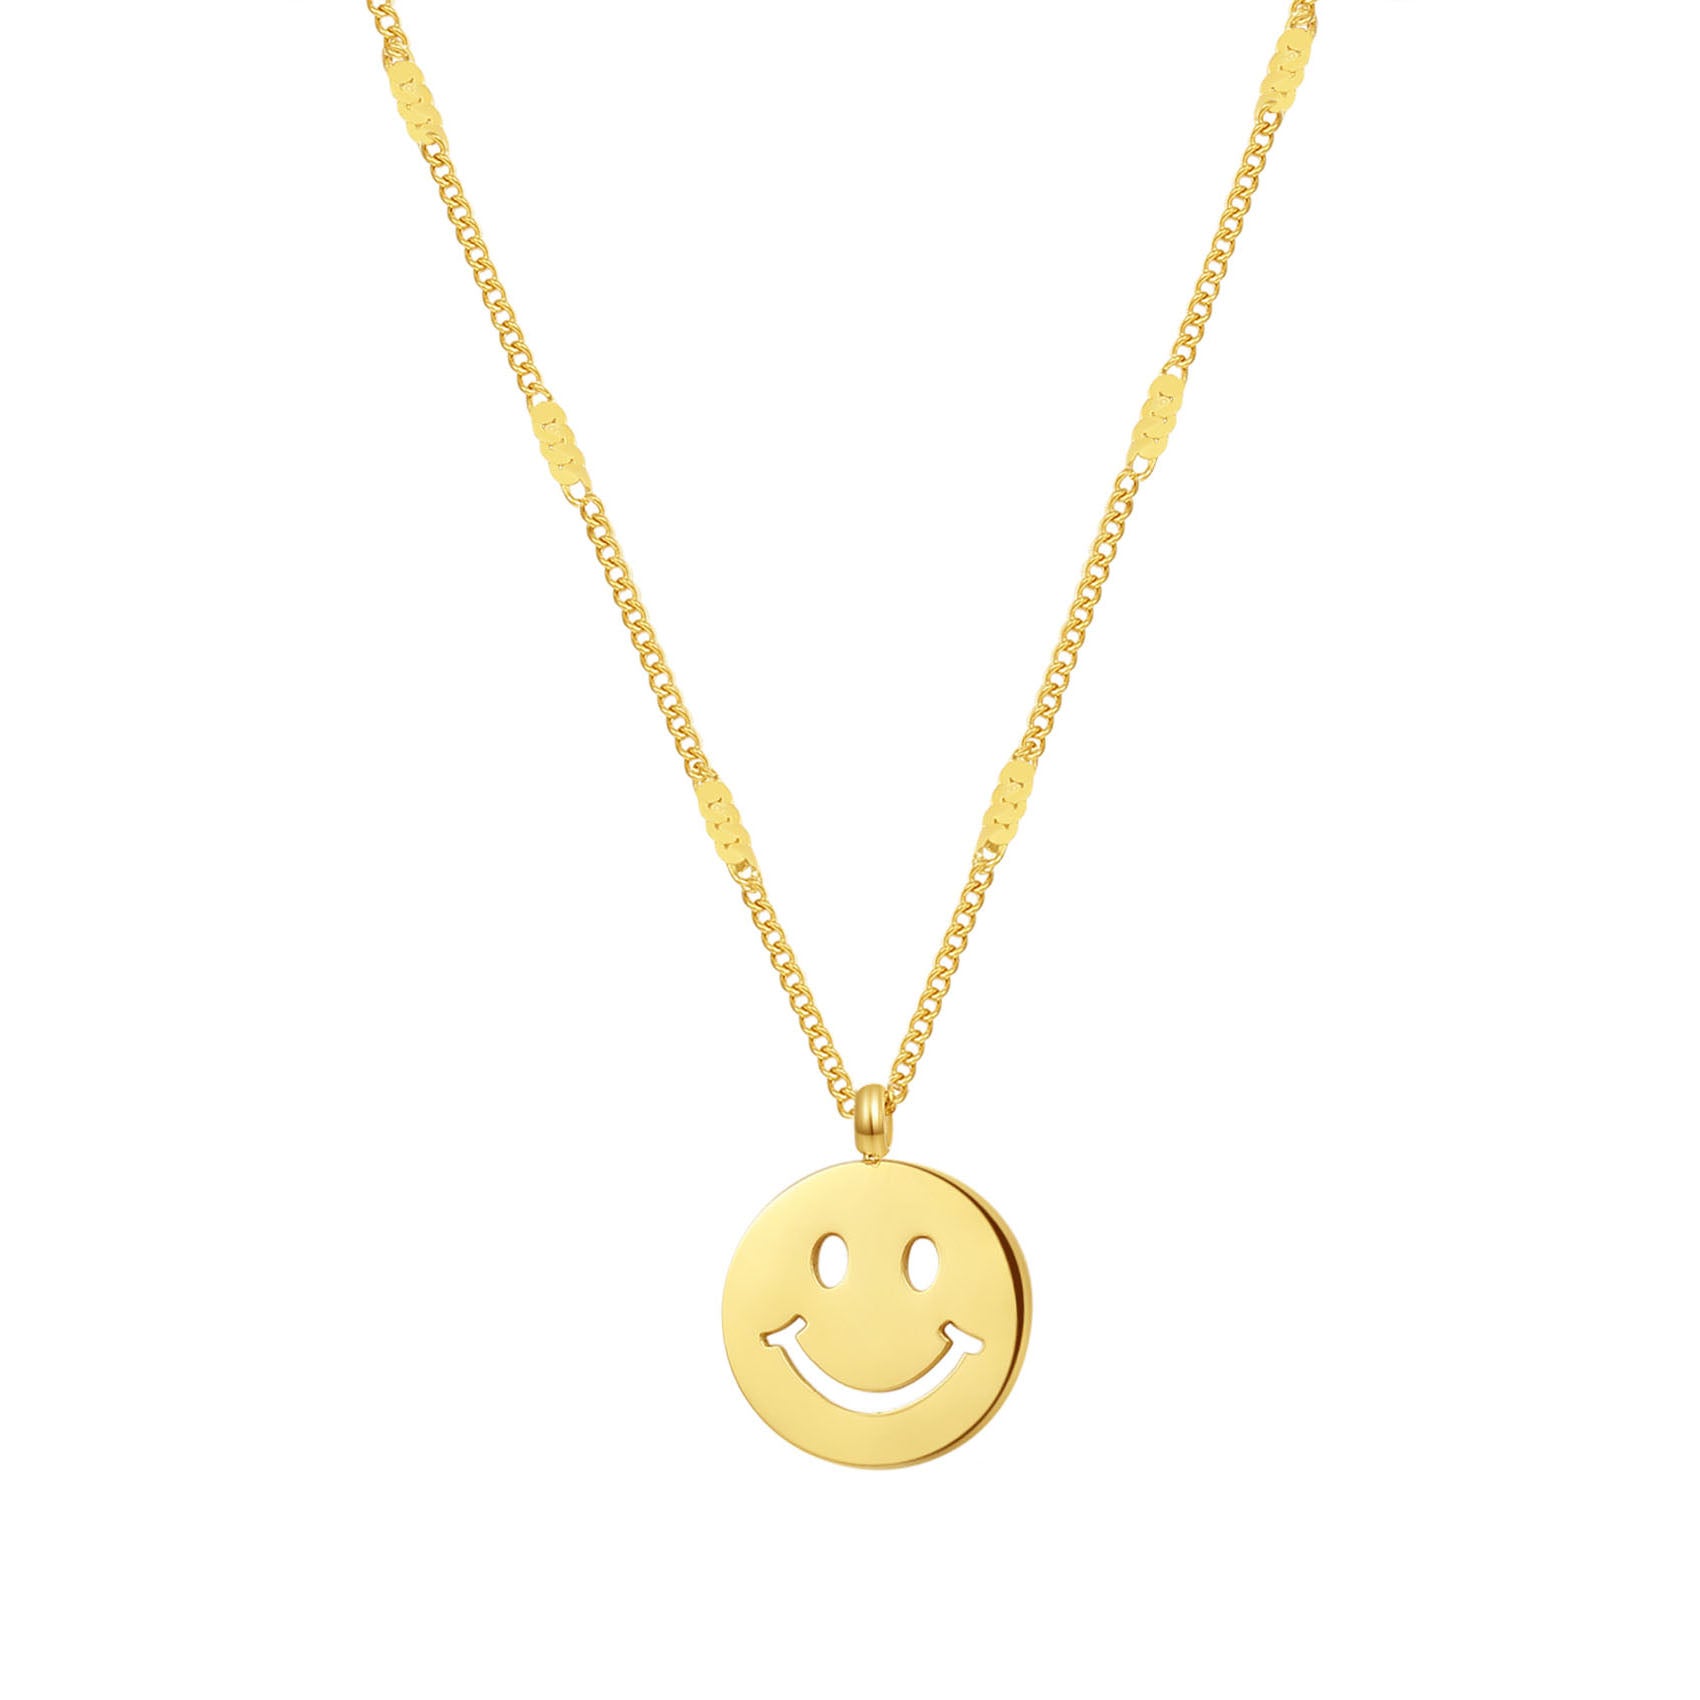 Kette Smiley Gesicht Anhänger Sterlingsilber in Gold – Hey Happiness